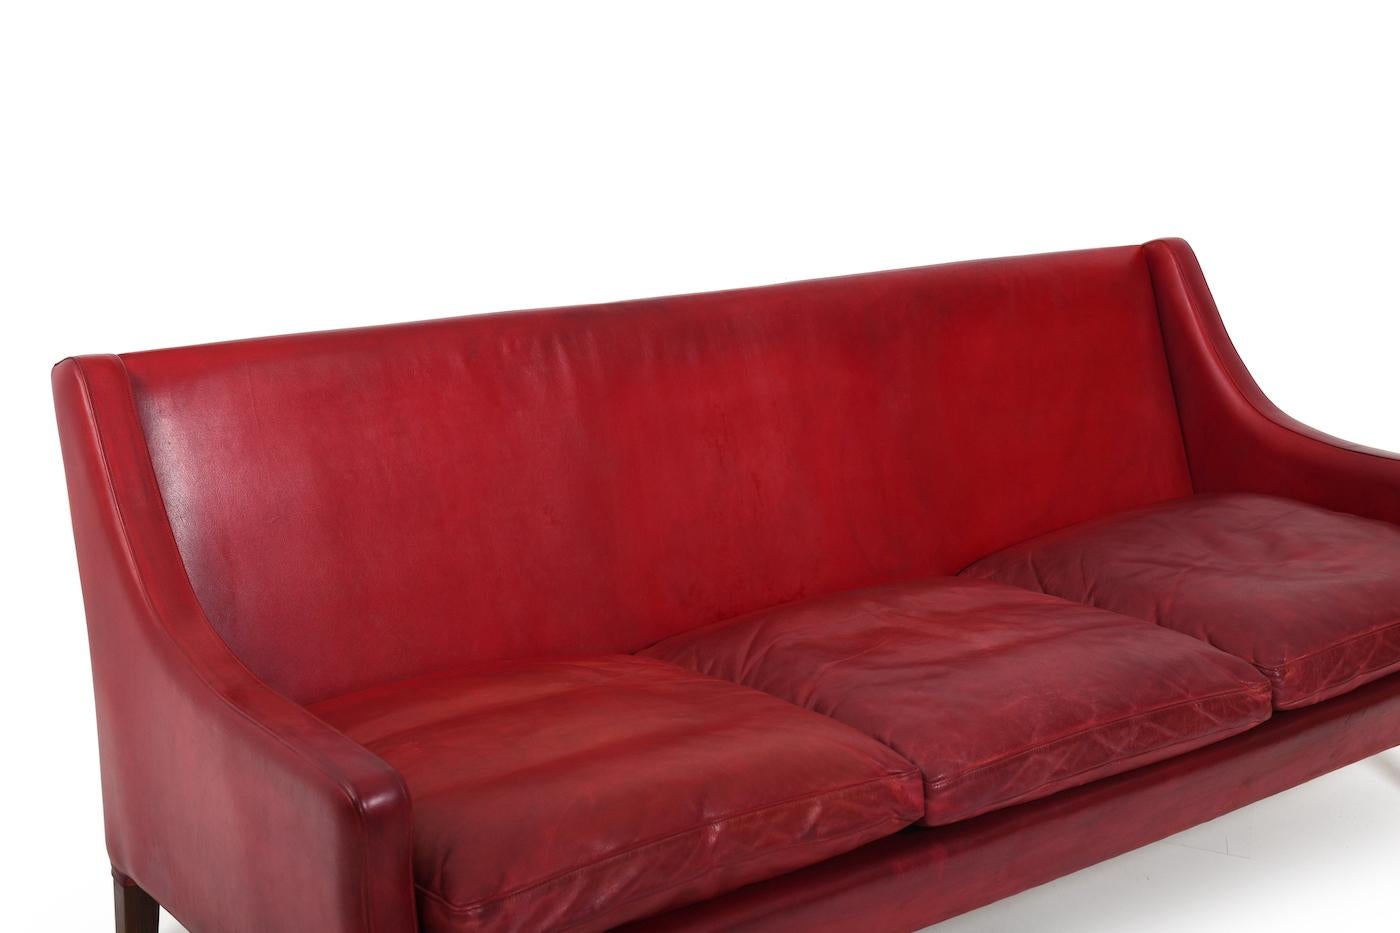 Patinated Indian Red Leather Sofa by Arne Wahl Iversen 5